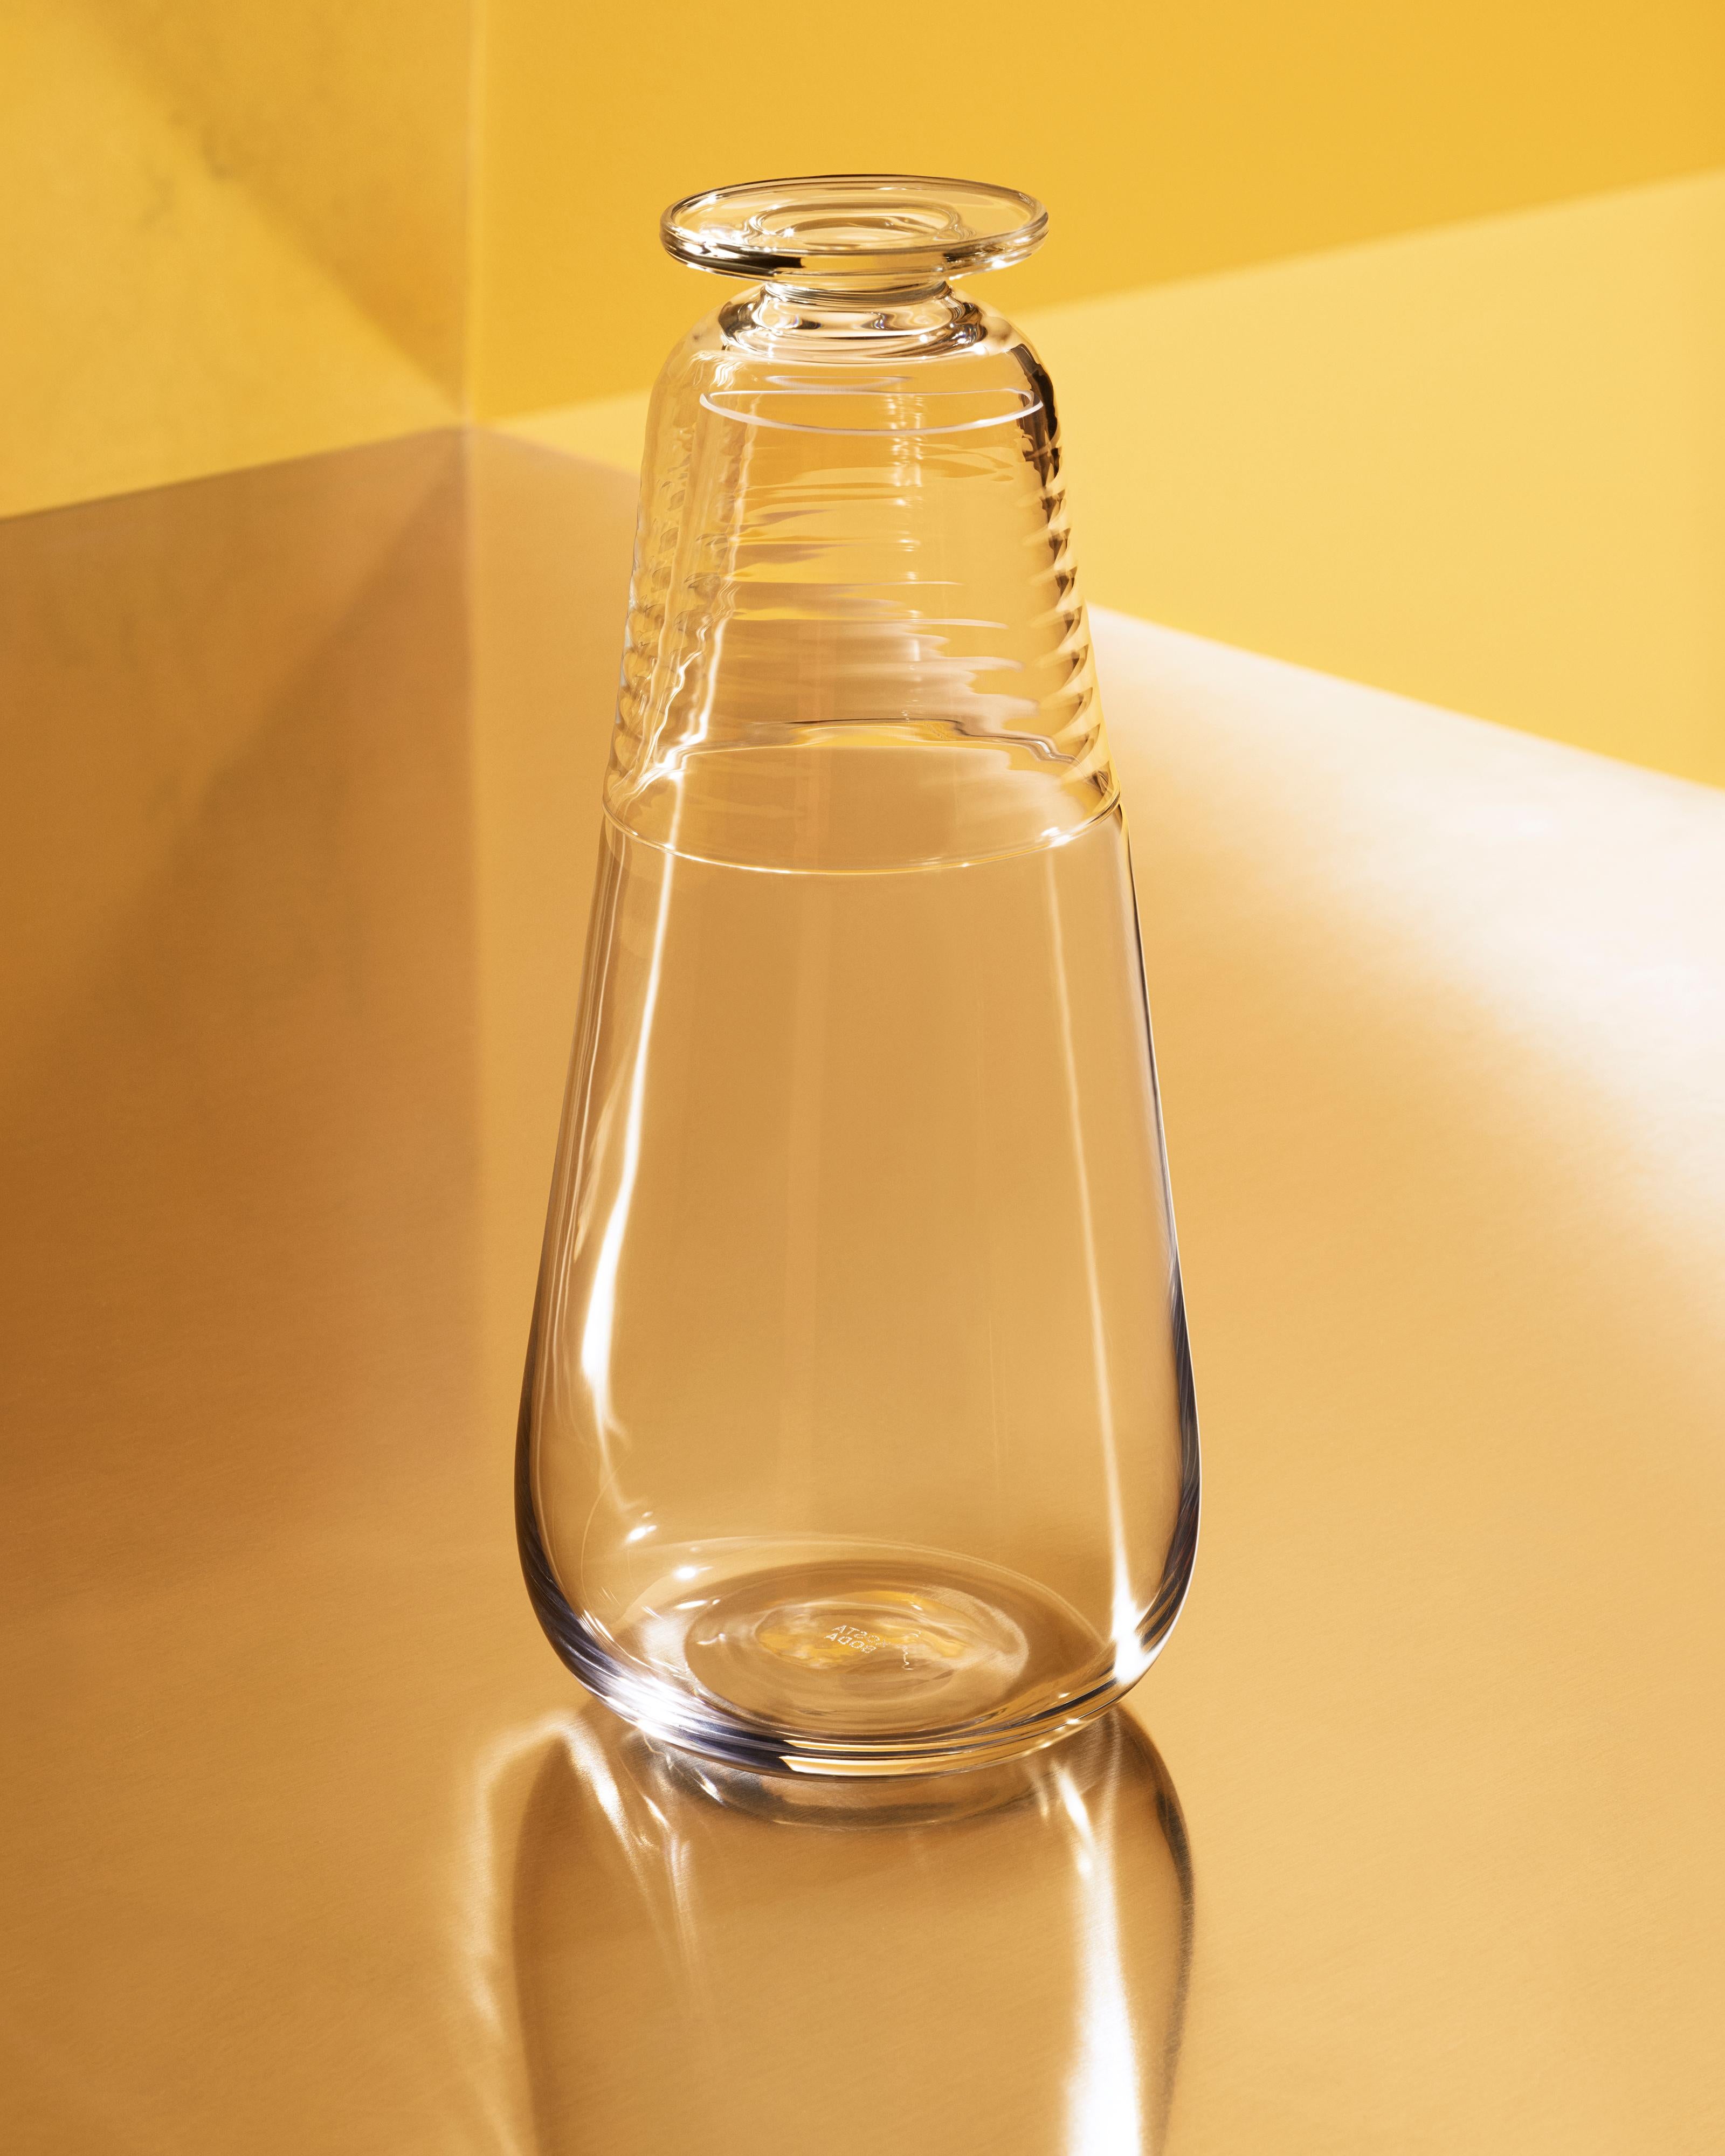 Viva la Vida! The carafe from Kosta Boda’s Viva collection has two beautiful sides. The lid doubles as a small stemware glass, and the carafe is great for serving water or wine. The choice is yours! Design by Matti Klenell.
